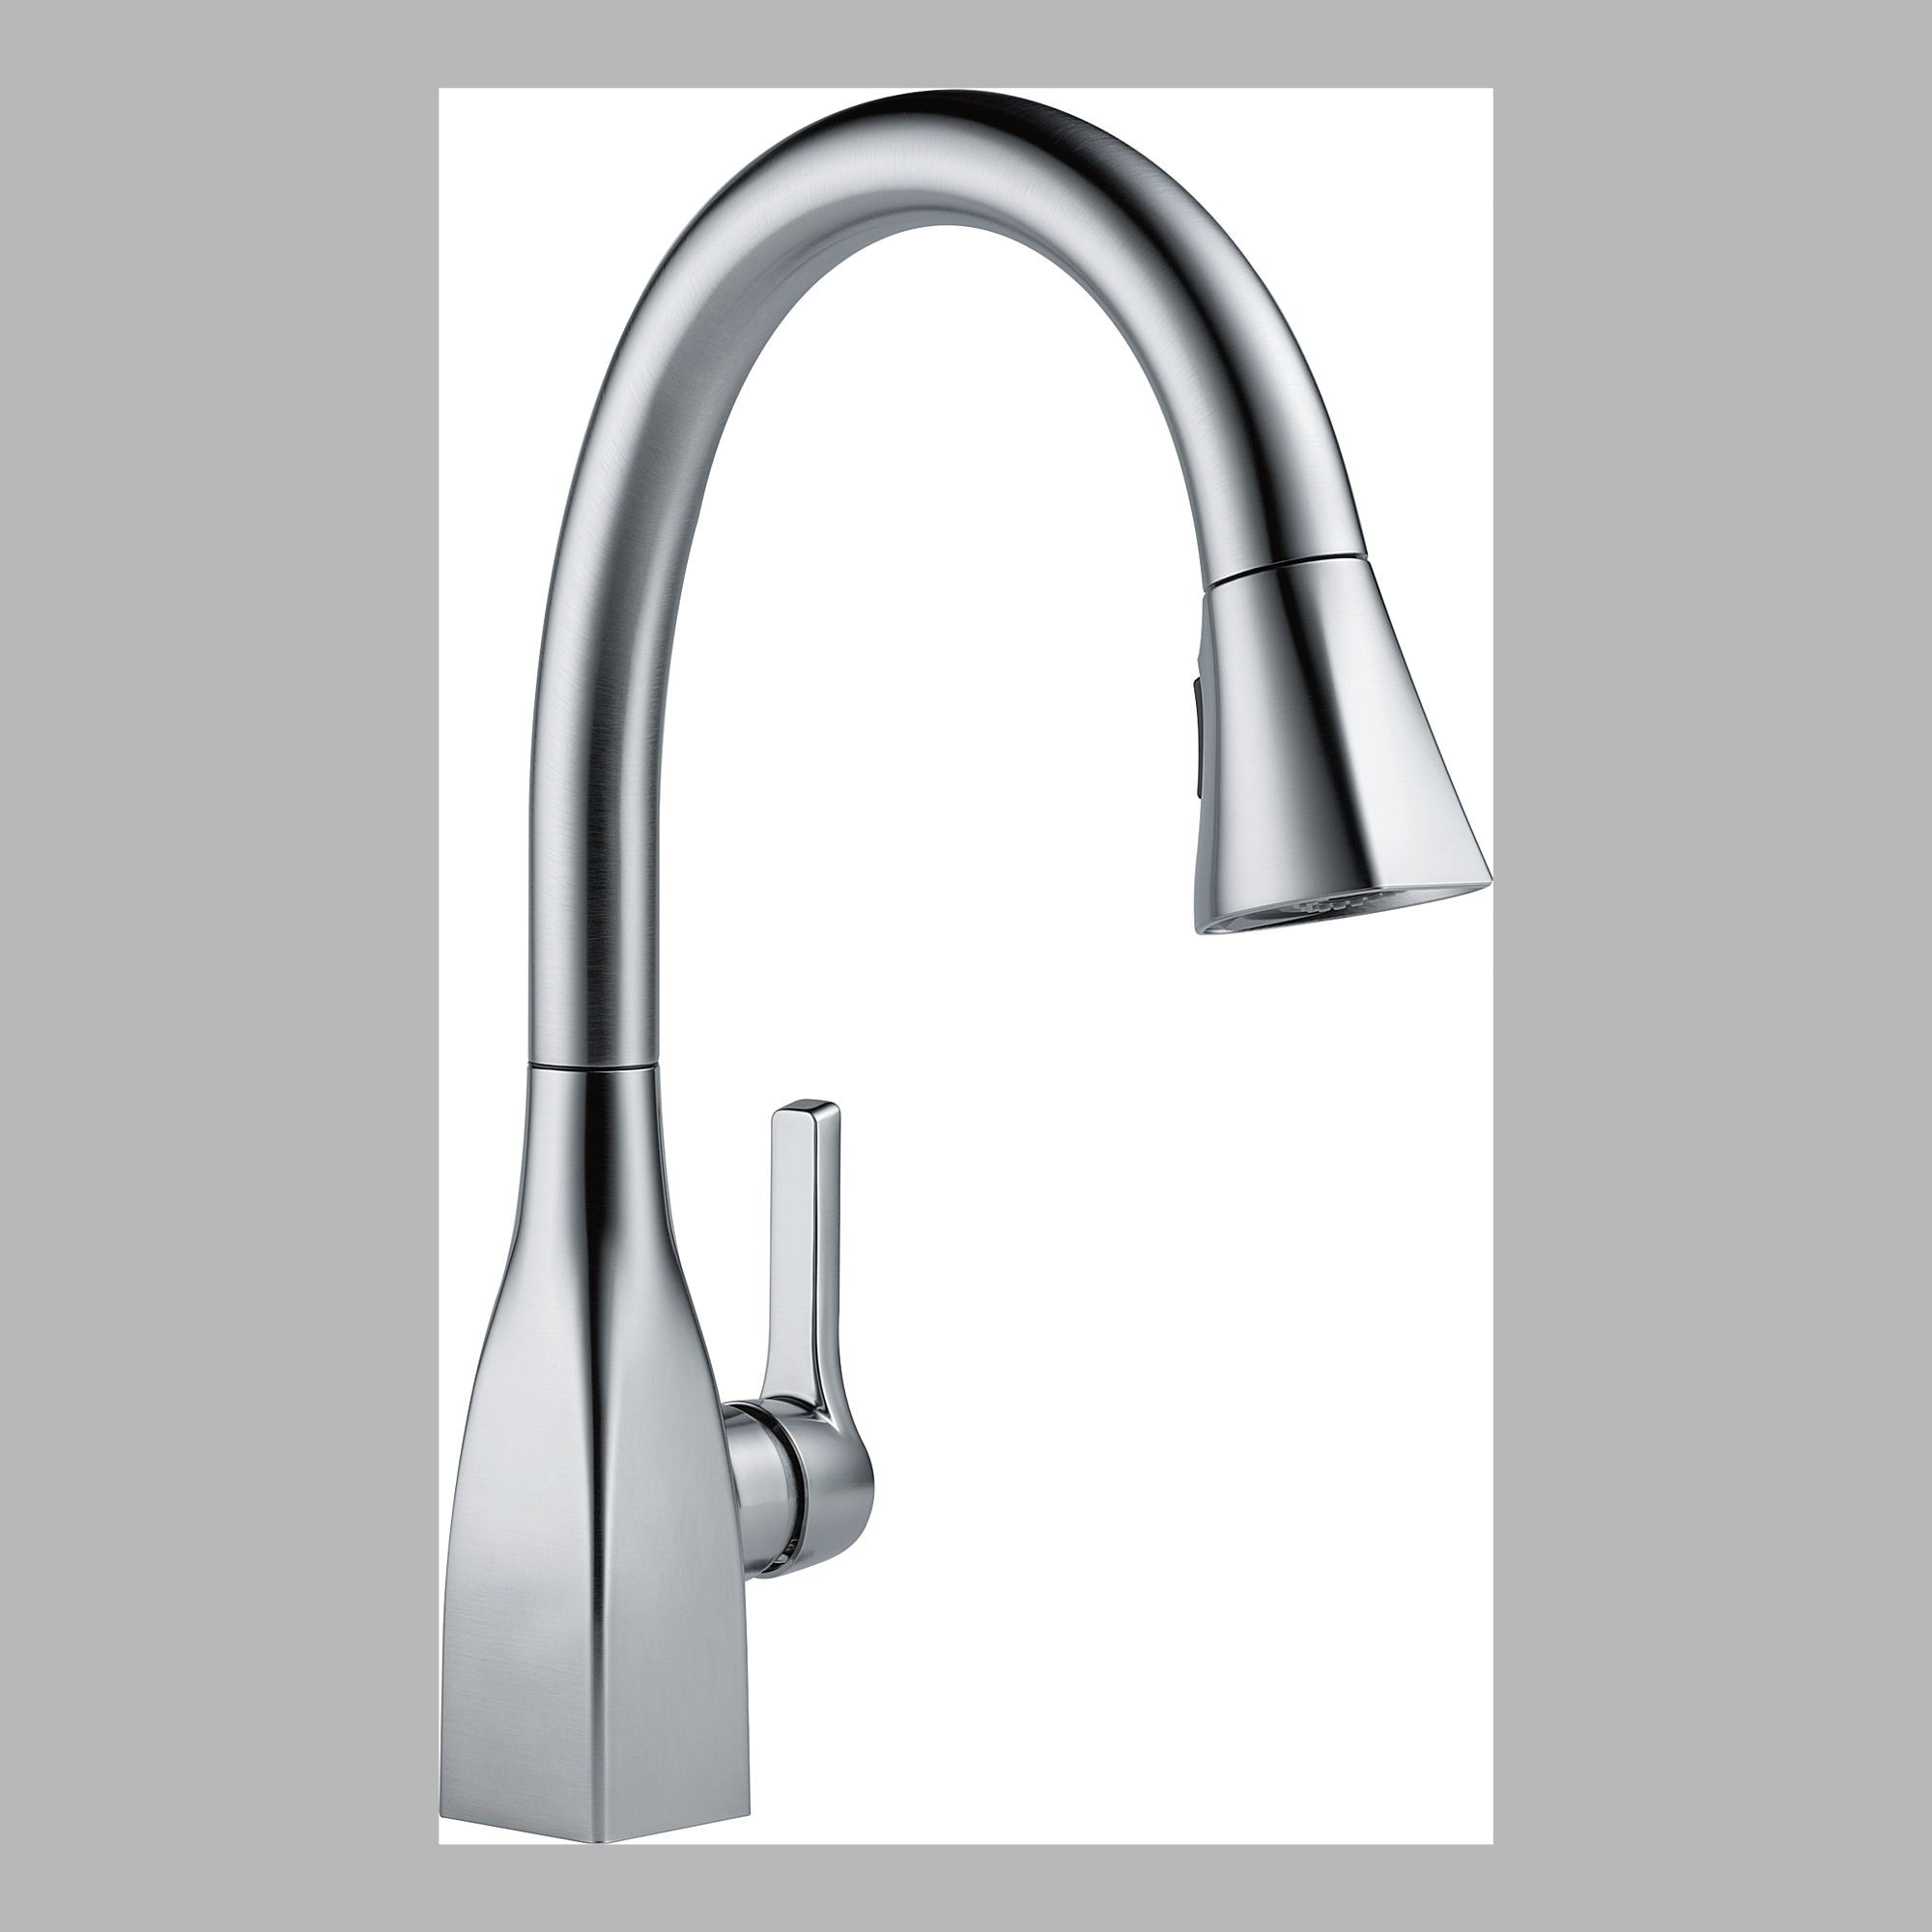 Delta-Delex-Brizo | 9183-AR-DST | 9183-AR-DST DELTA MATEO: SINGLE HANDLE PULL-DOWN KITCHEN FAUCET ARCTIC STAINLESS